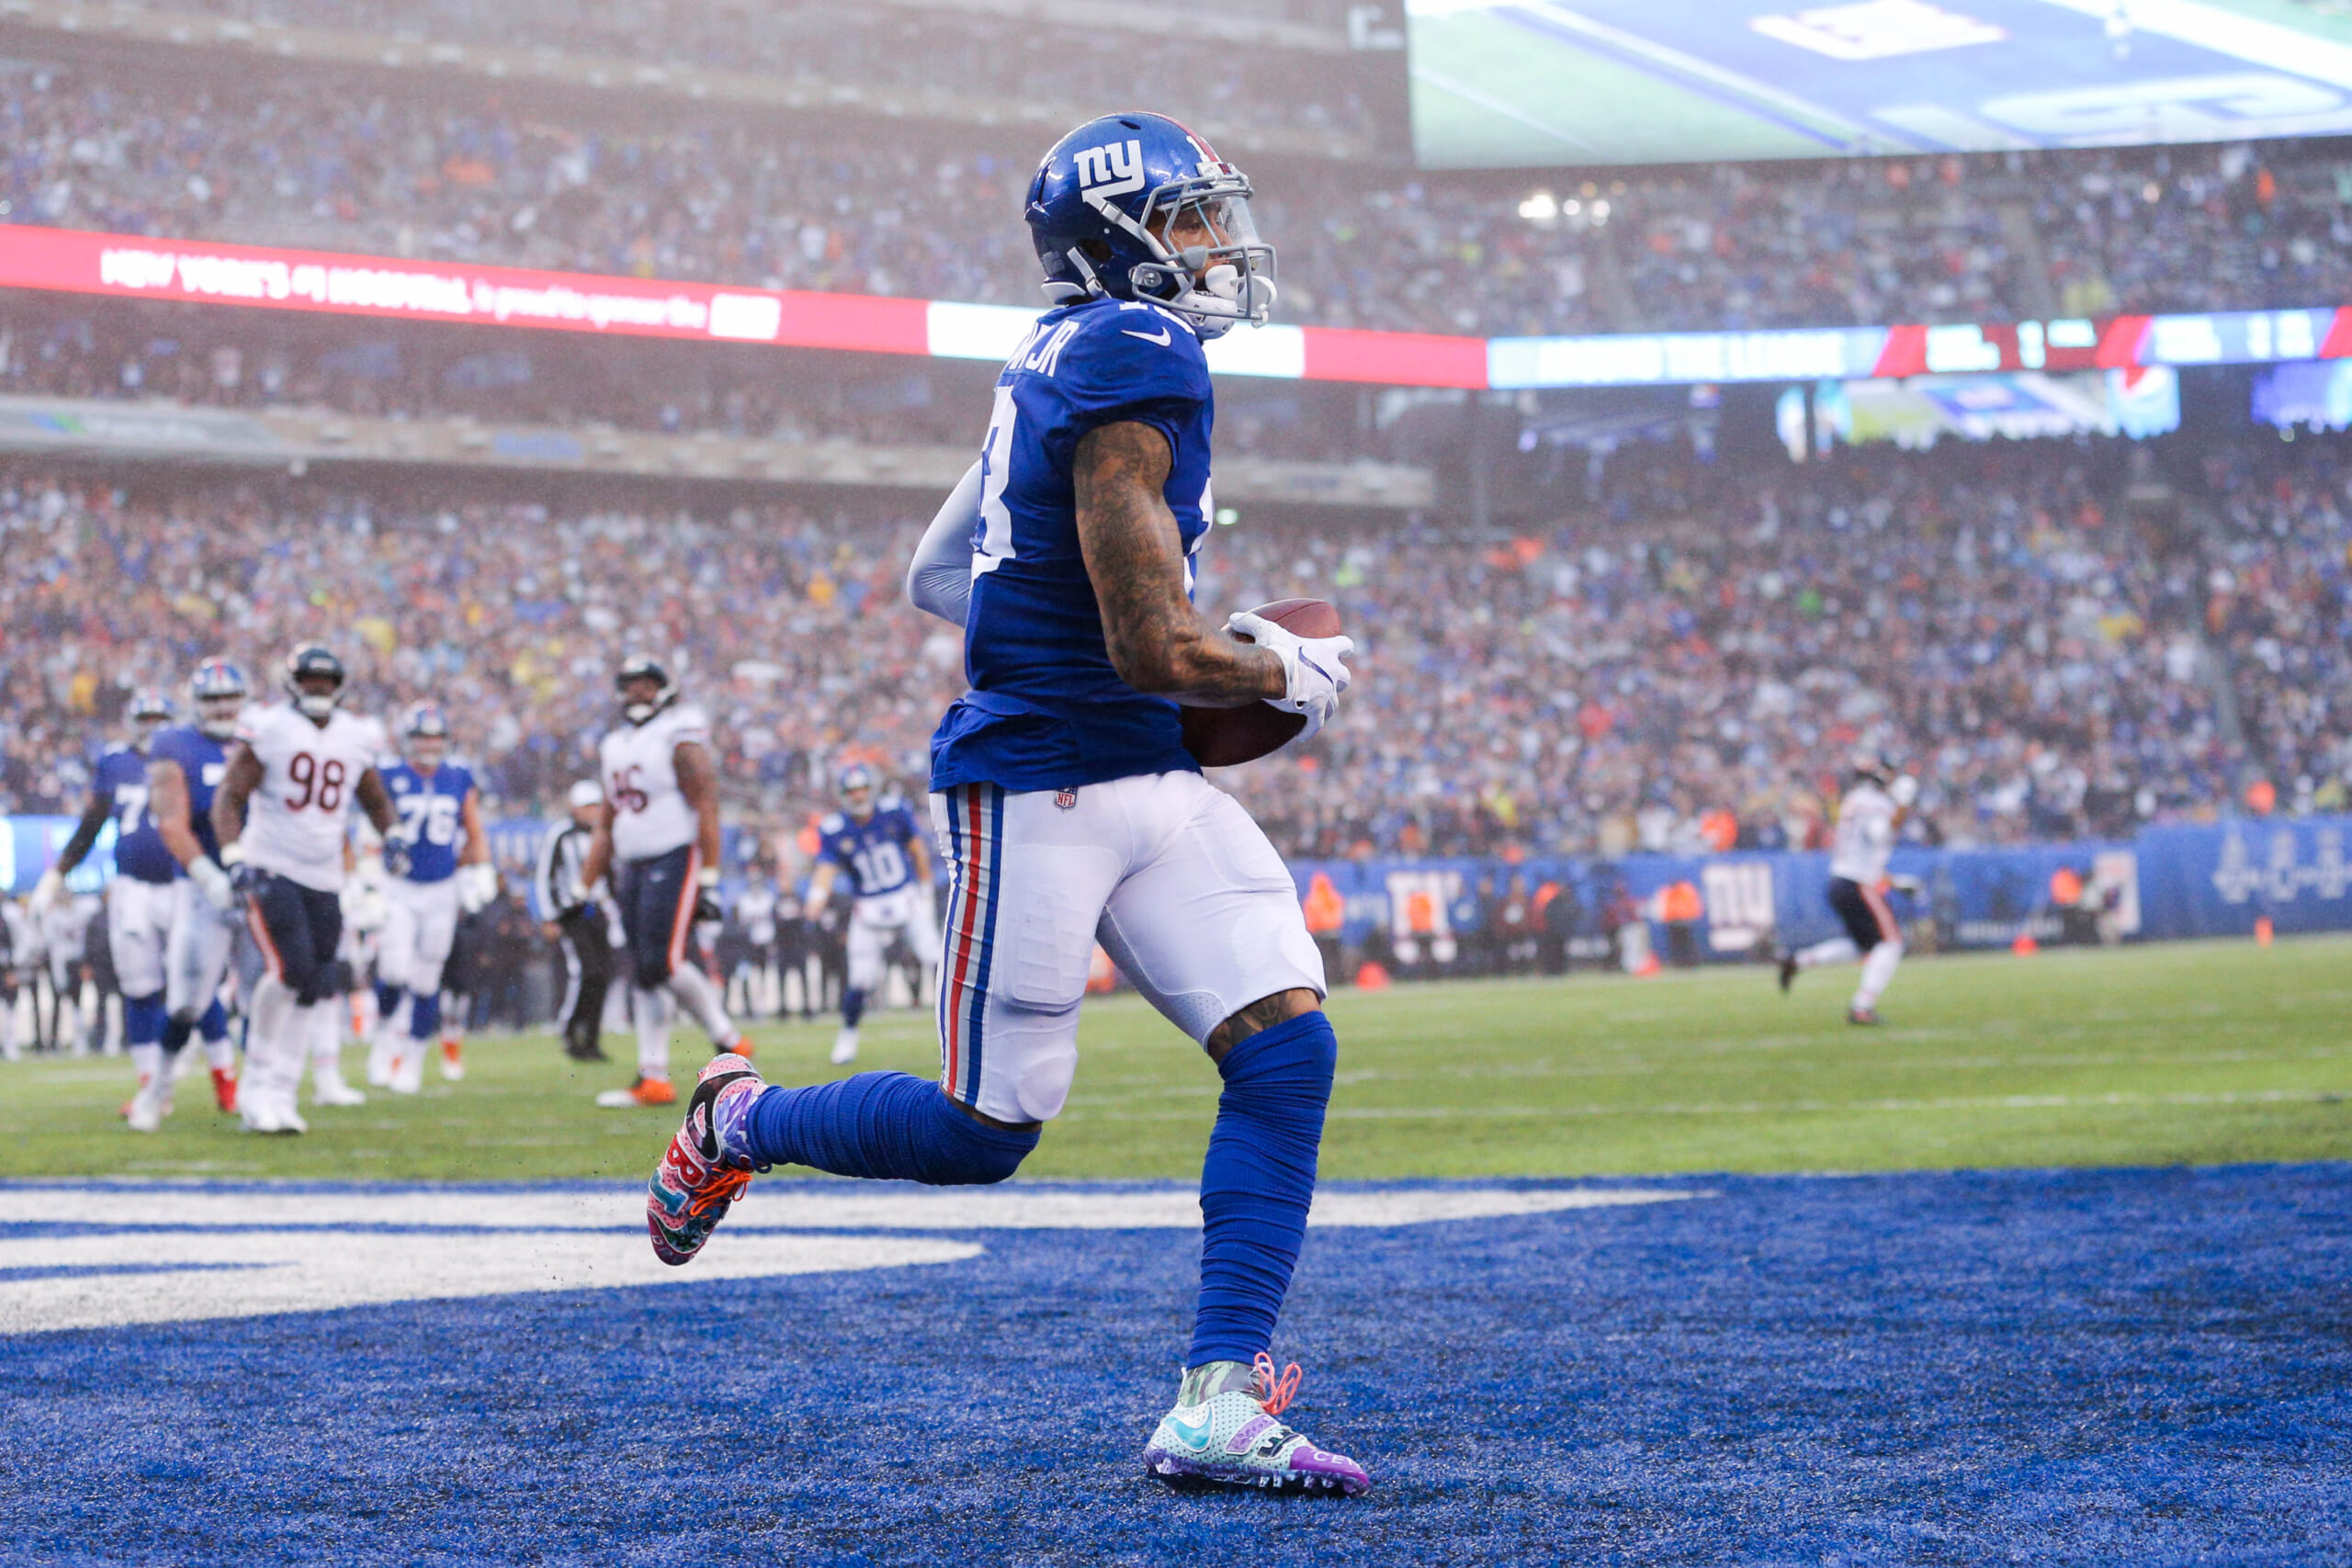 Why New York Giants should consider reunion with Odell Beckham Jr